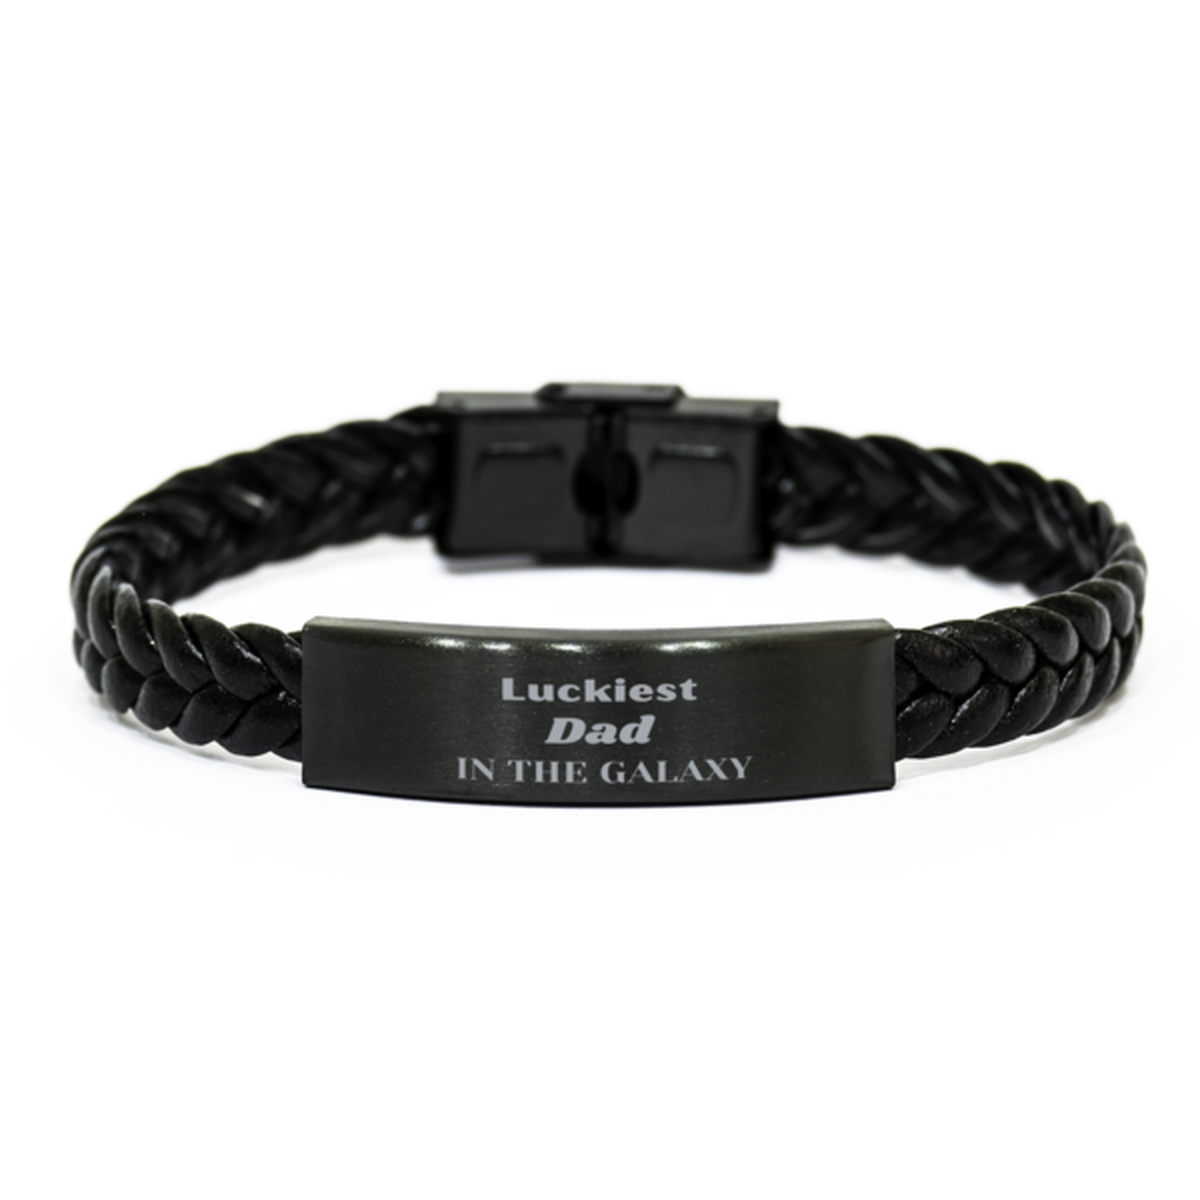 Luckiest Dad in the Galaxy, To My Dad Engraved Gifts, Christmas Dad Braided Leather Bracelet Gifts, X-mas Birthday Unique Gifts For Dad Men Women